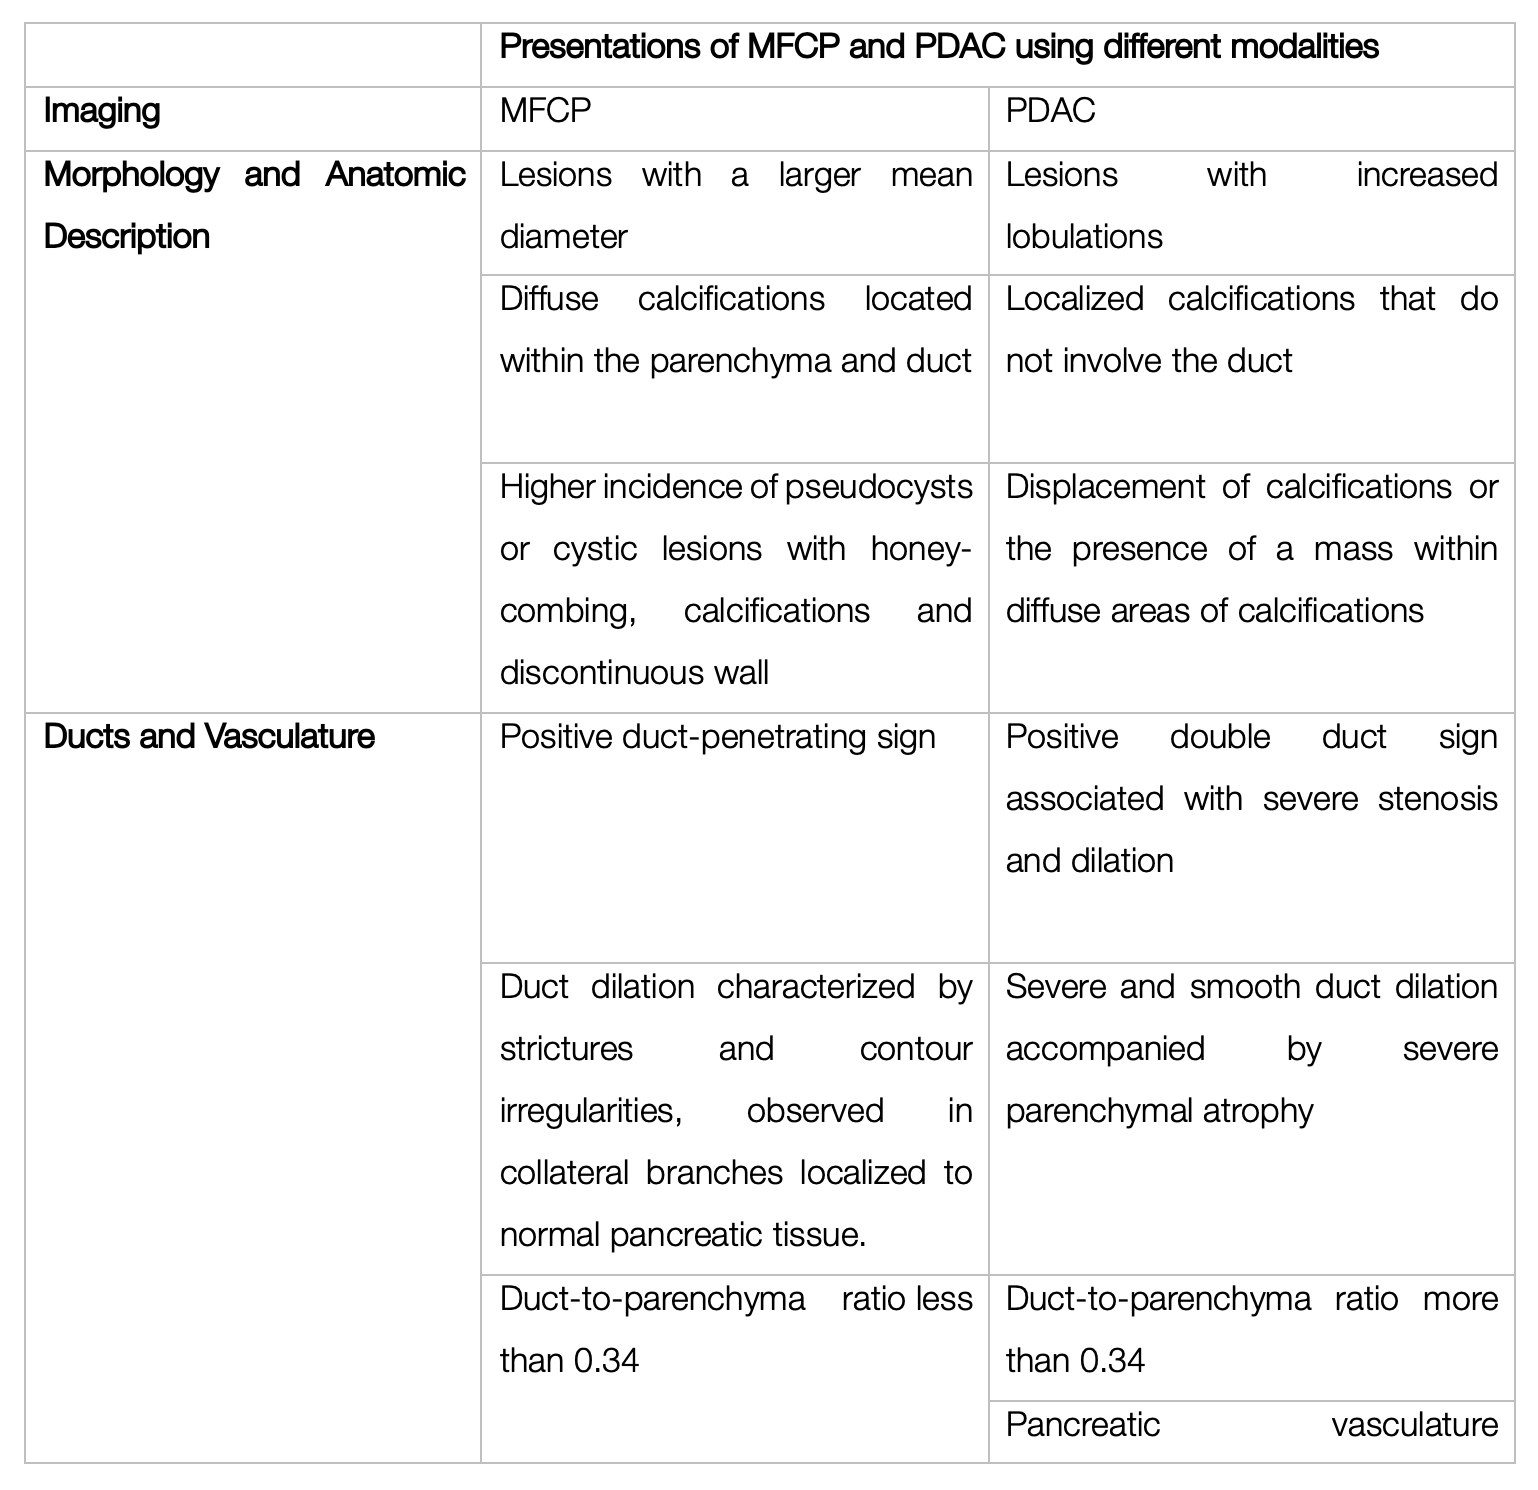 Summary of modalities used to differentiate between PDAC and MFCP